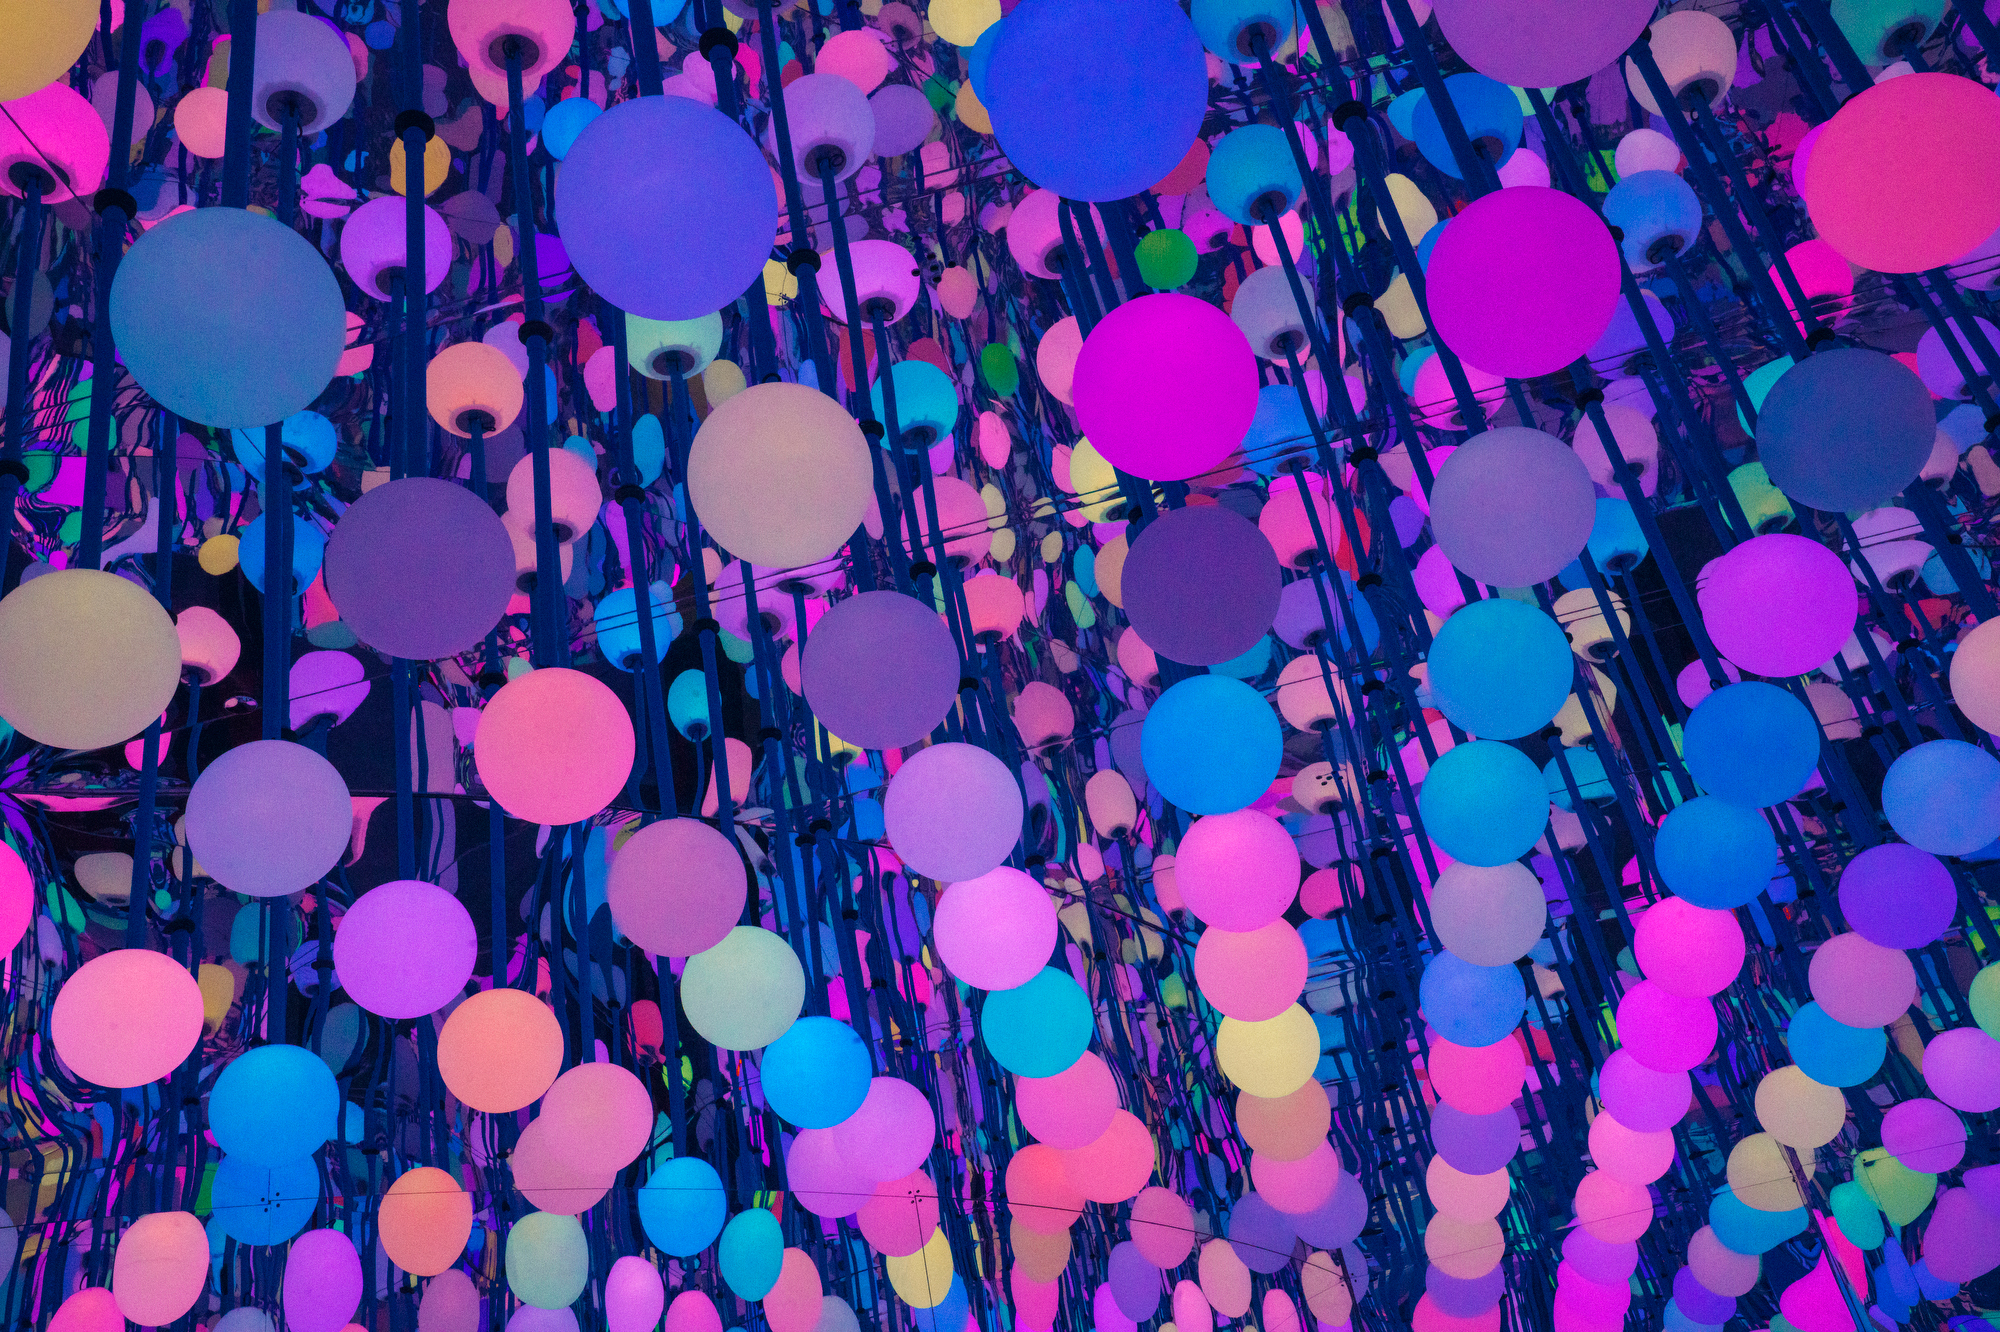 A colorful light installation photographed by Houston commercial photographer, Todd Spoth.